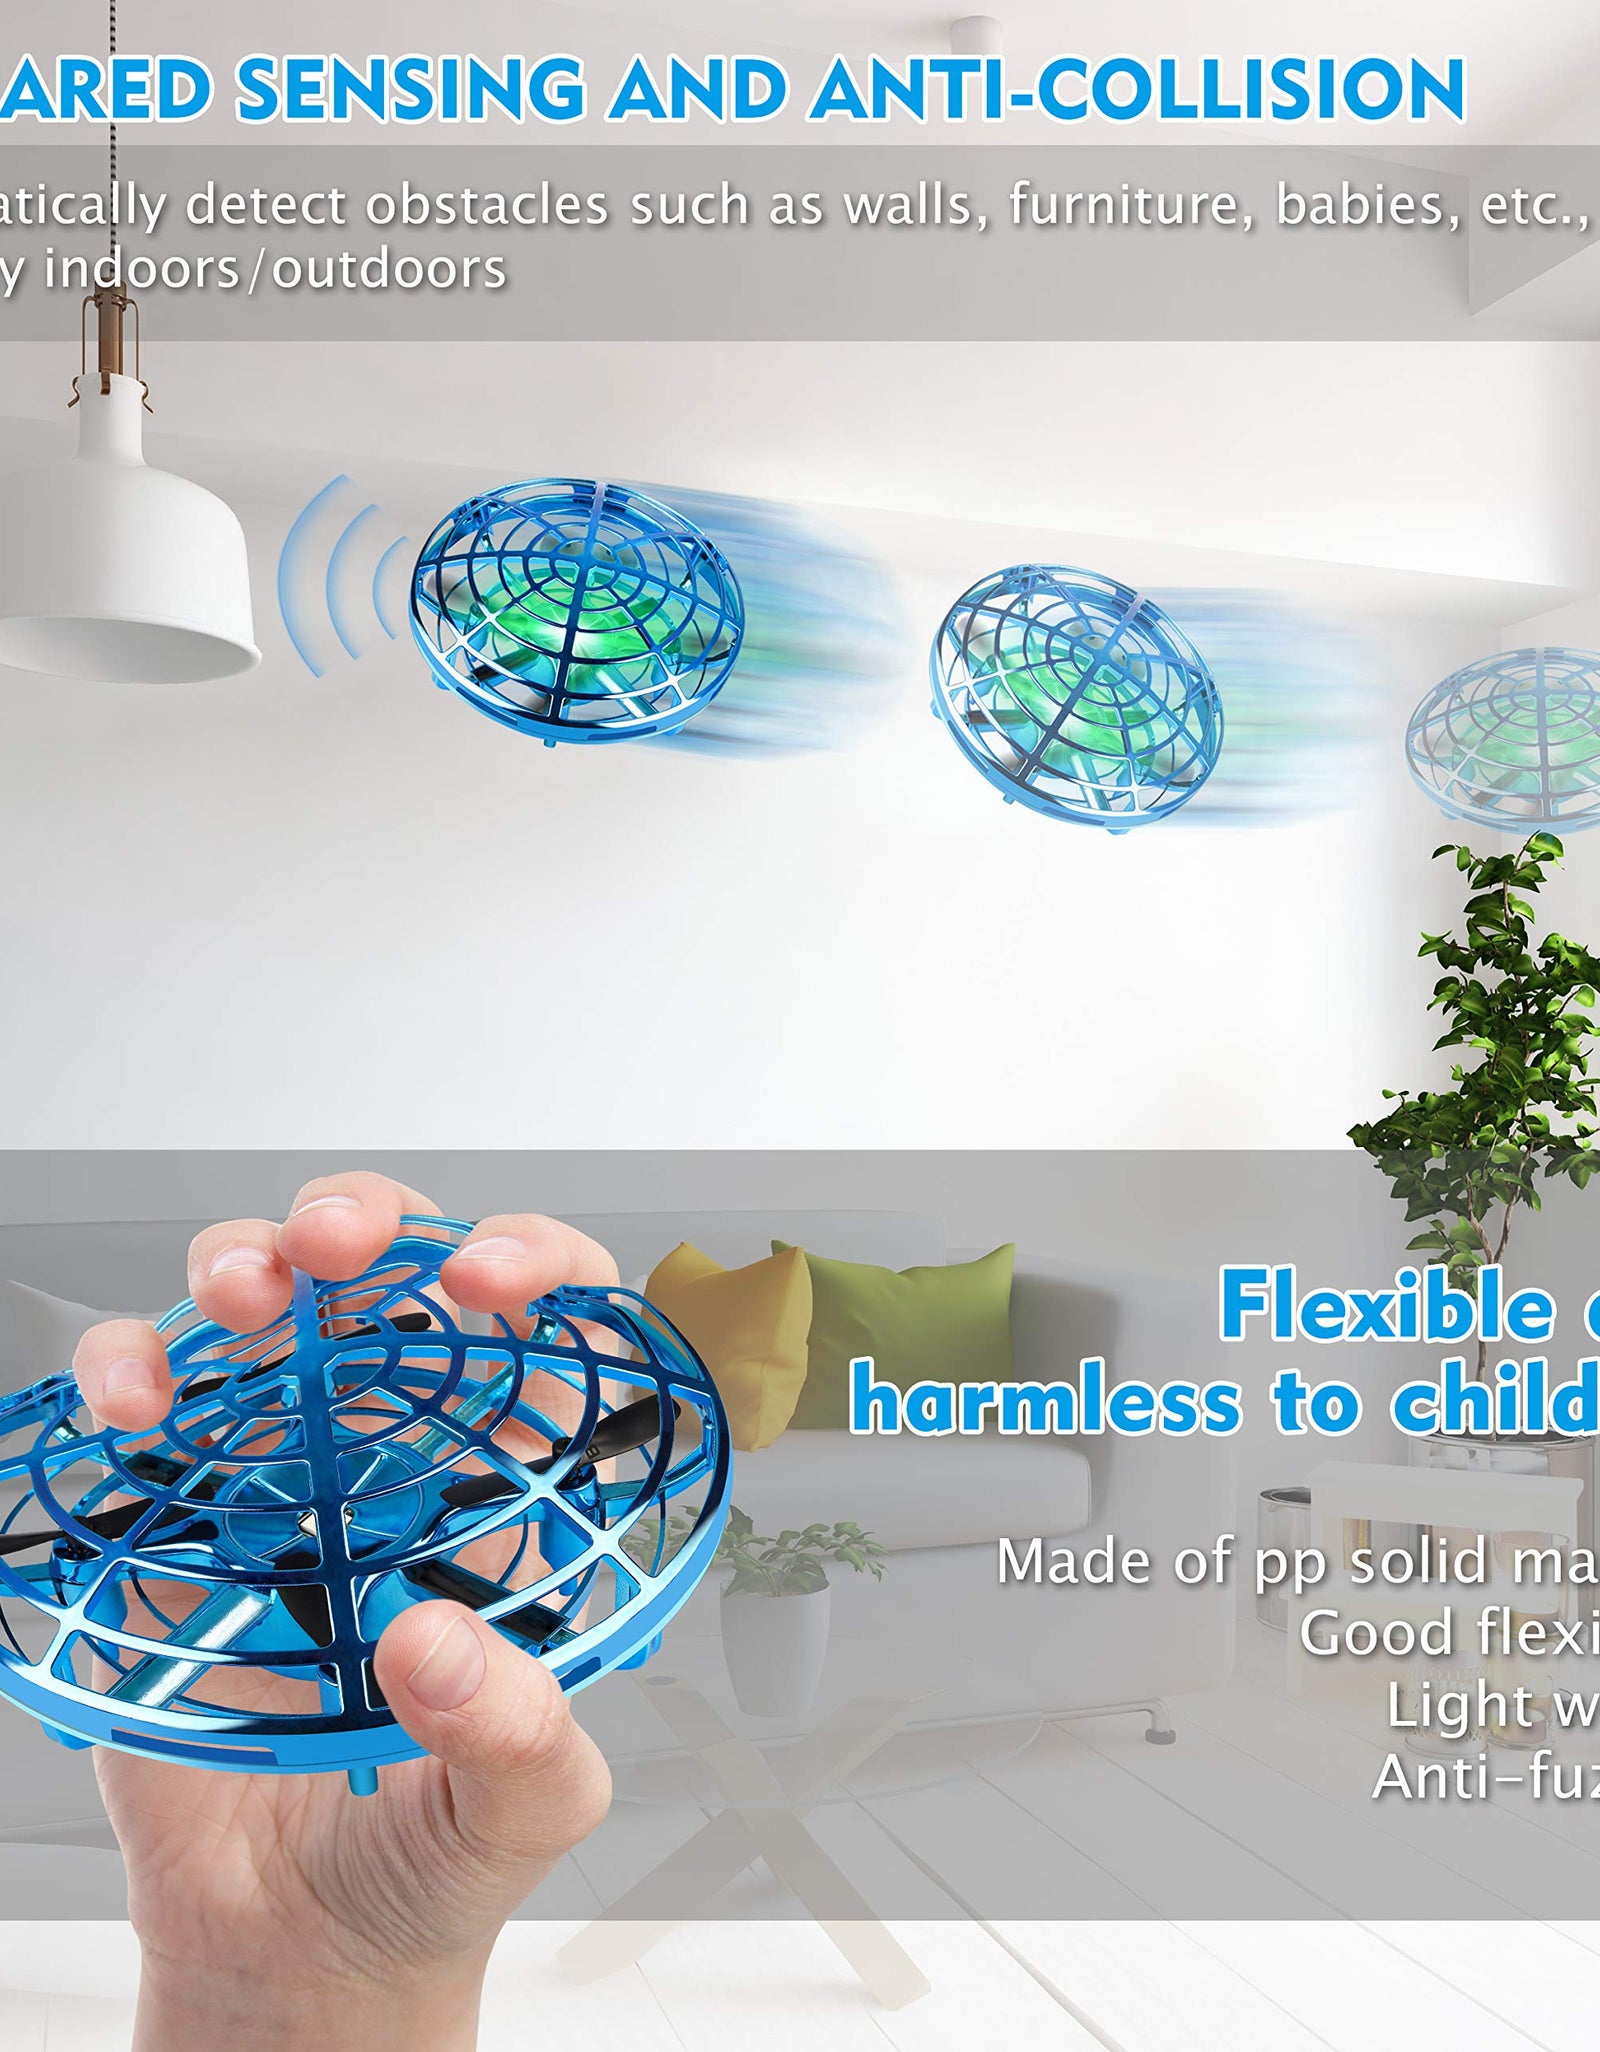 Hand Operated Drones for Kids or Adult - Interactive Infrared Induction Indoor Helicopter Ball with 360° Rotating and Shinning LED Lights,Hand-Controlled Flying Ball Toys for 5 6 7 8 9 10 11 12 Years